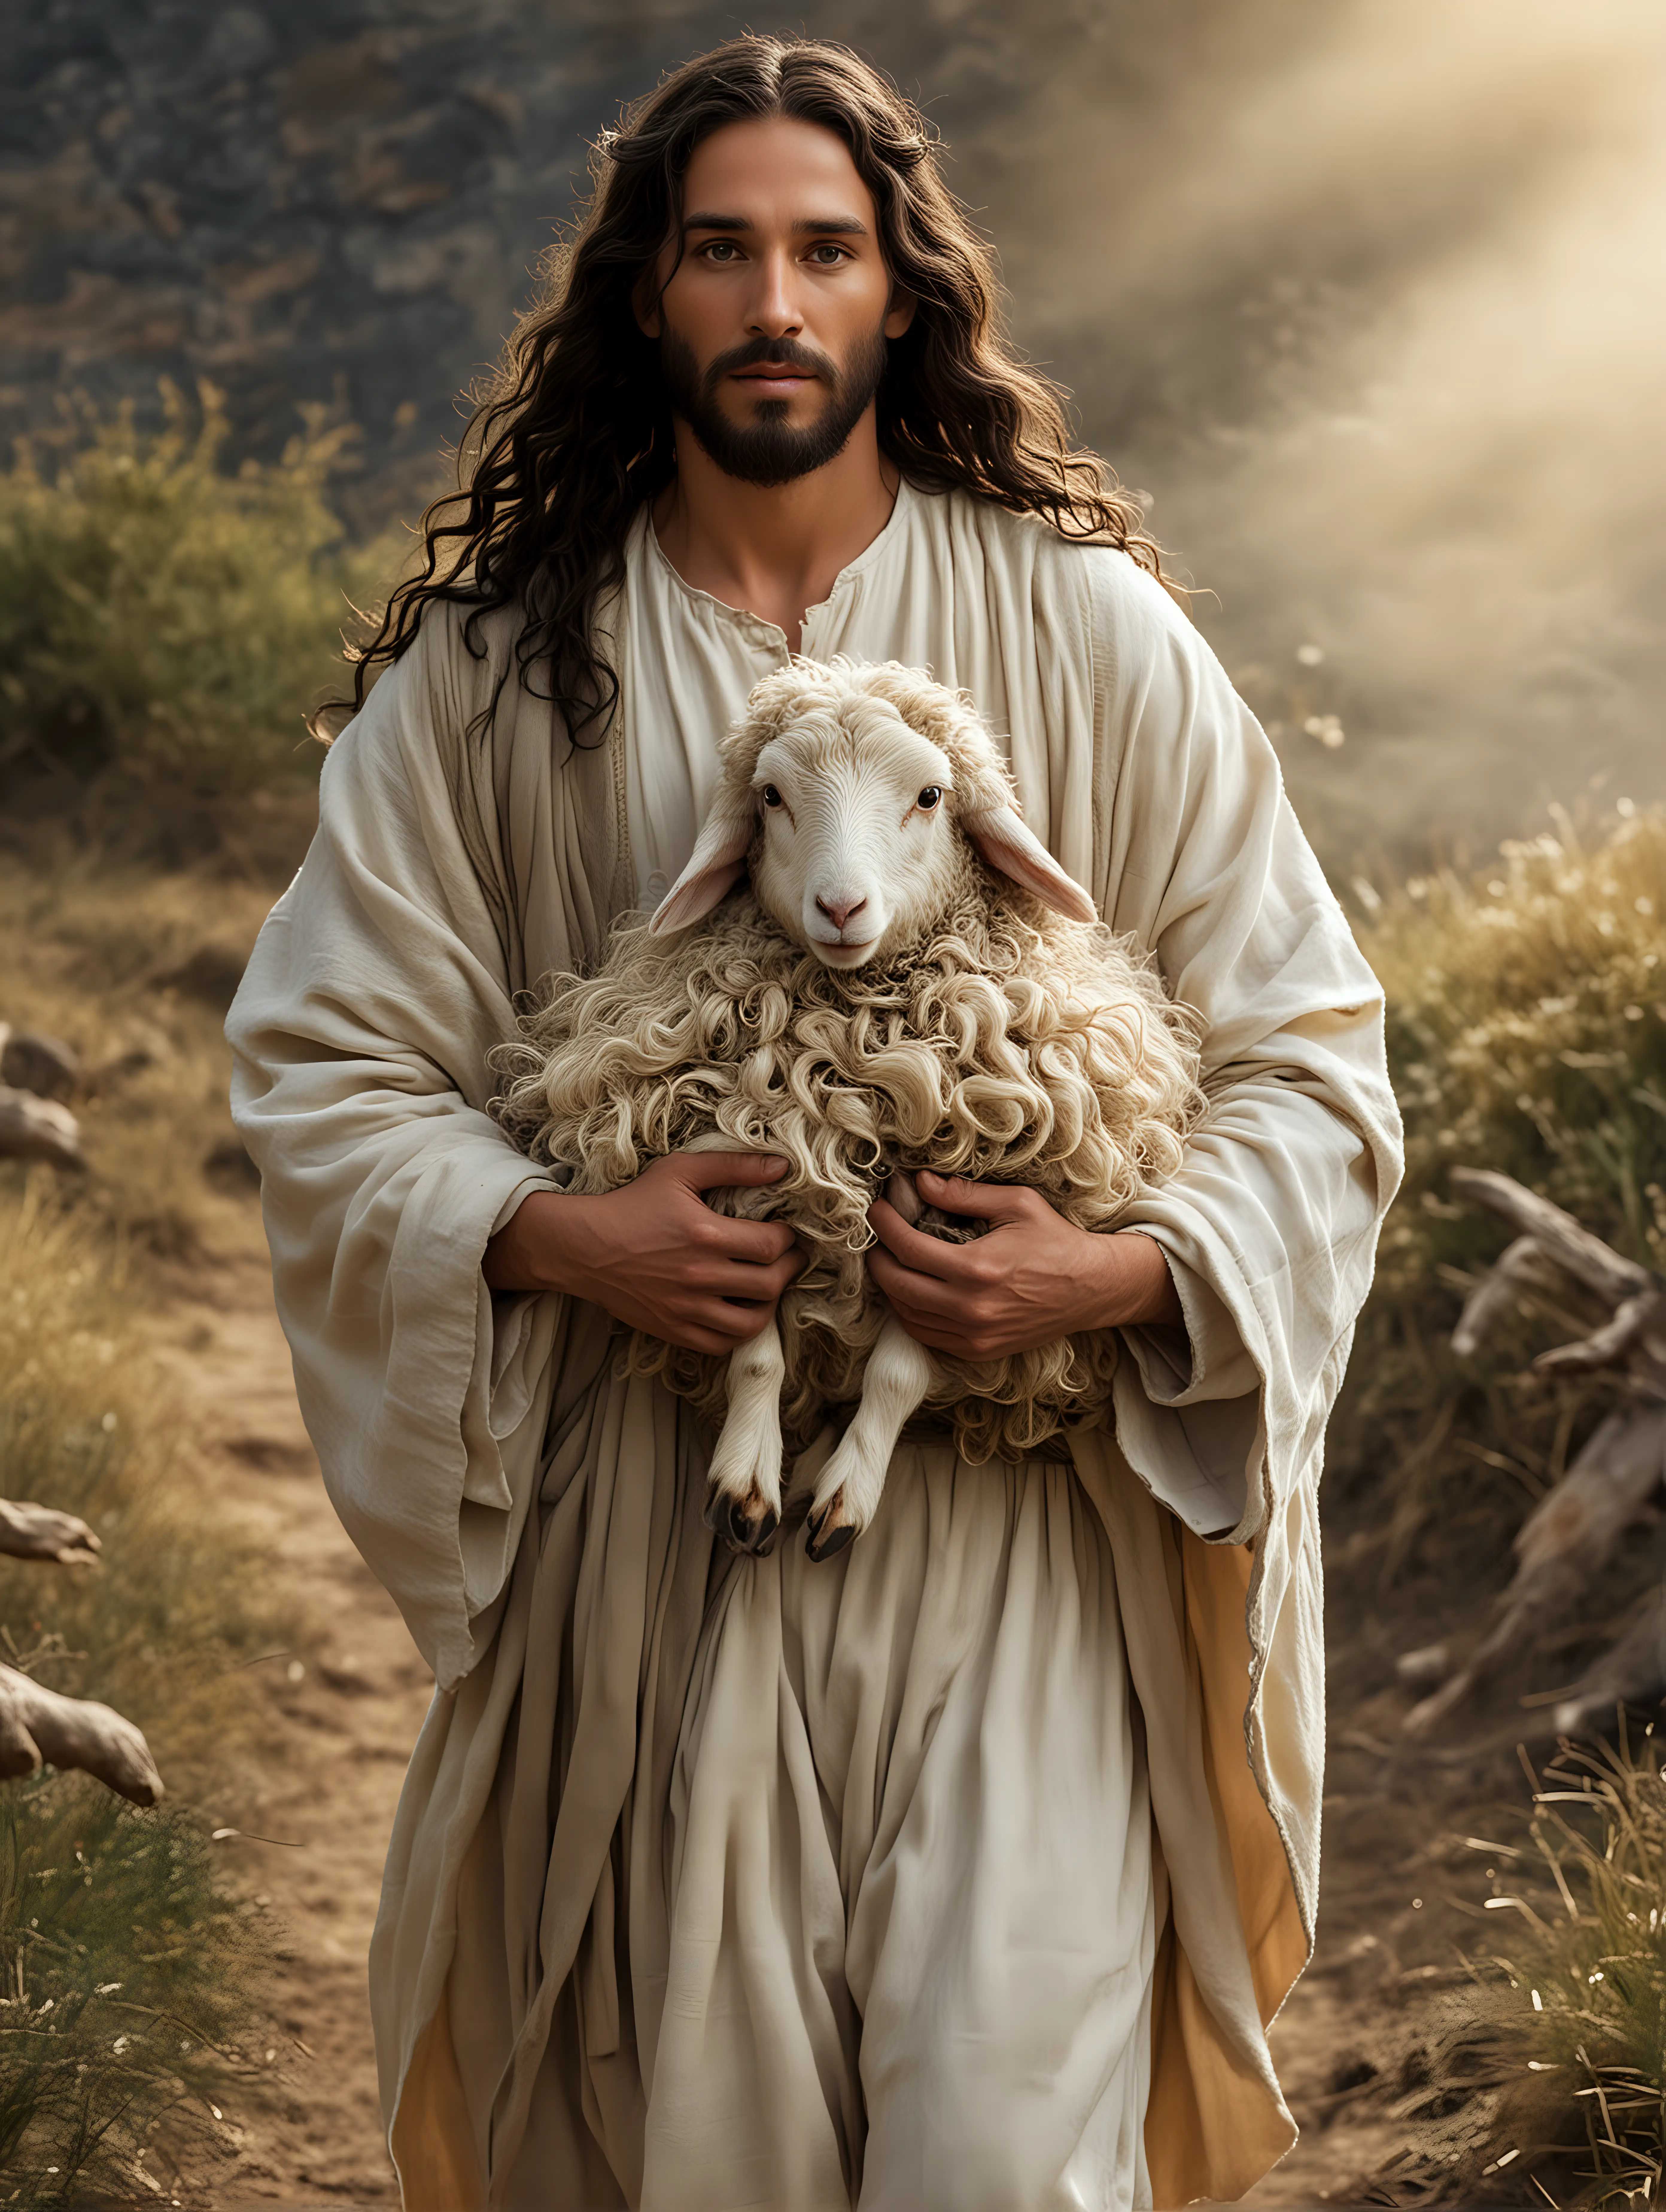 JESUS WITH LONG, DARK WAVY HAIR, CARRYING A LAMB IN HIS ARMS